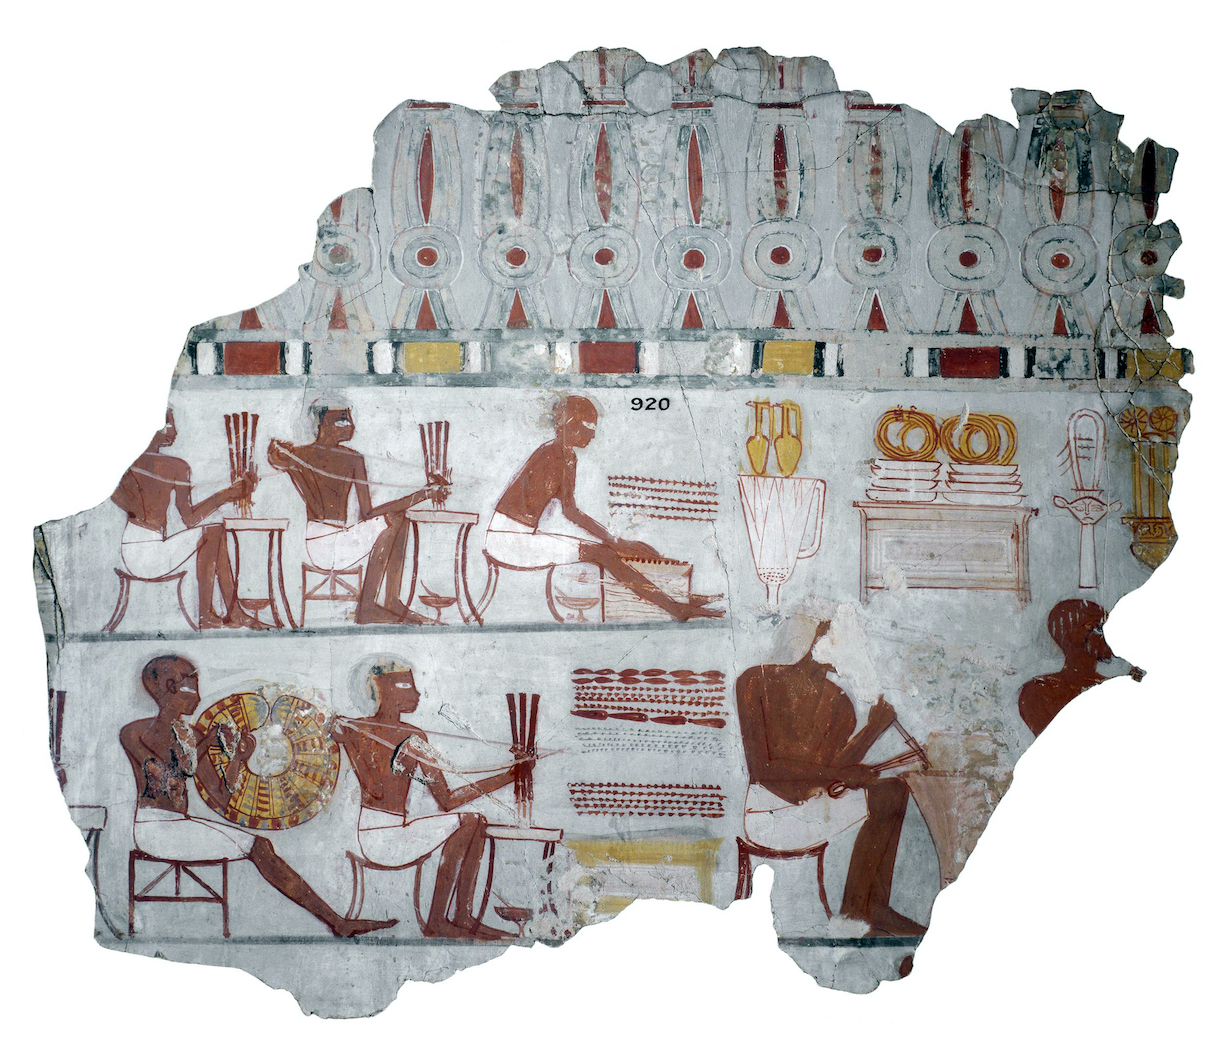 Scene showing the manufacture of valuable items, such as jewelry. Wall-painting, probably from the tomb of Sobekhotep, Thebes, c. 1400 B.C.E., New Kingdom, reign of Thutmose IV, painted stucco, 60 x 58.5 (© Trustees of the British Museum)